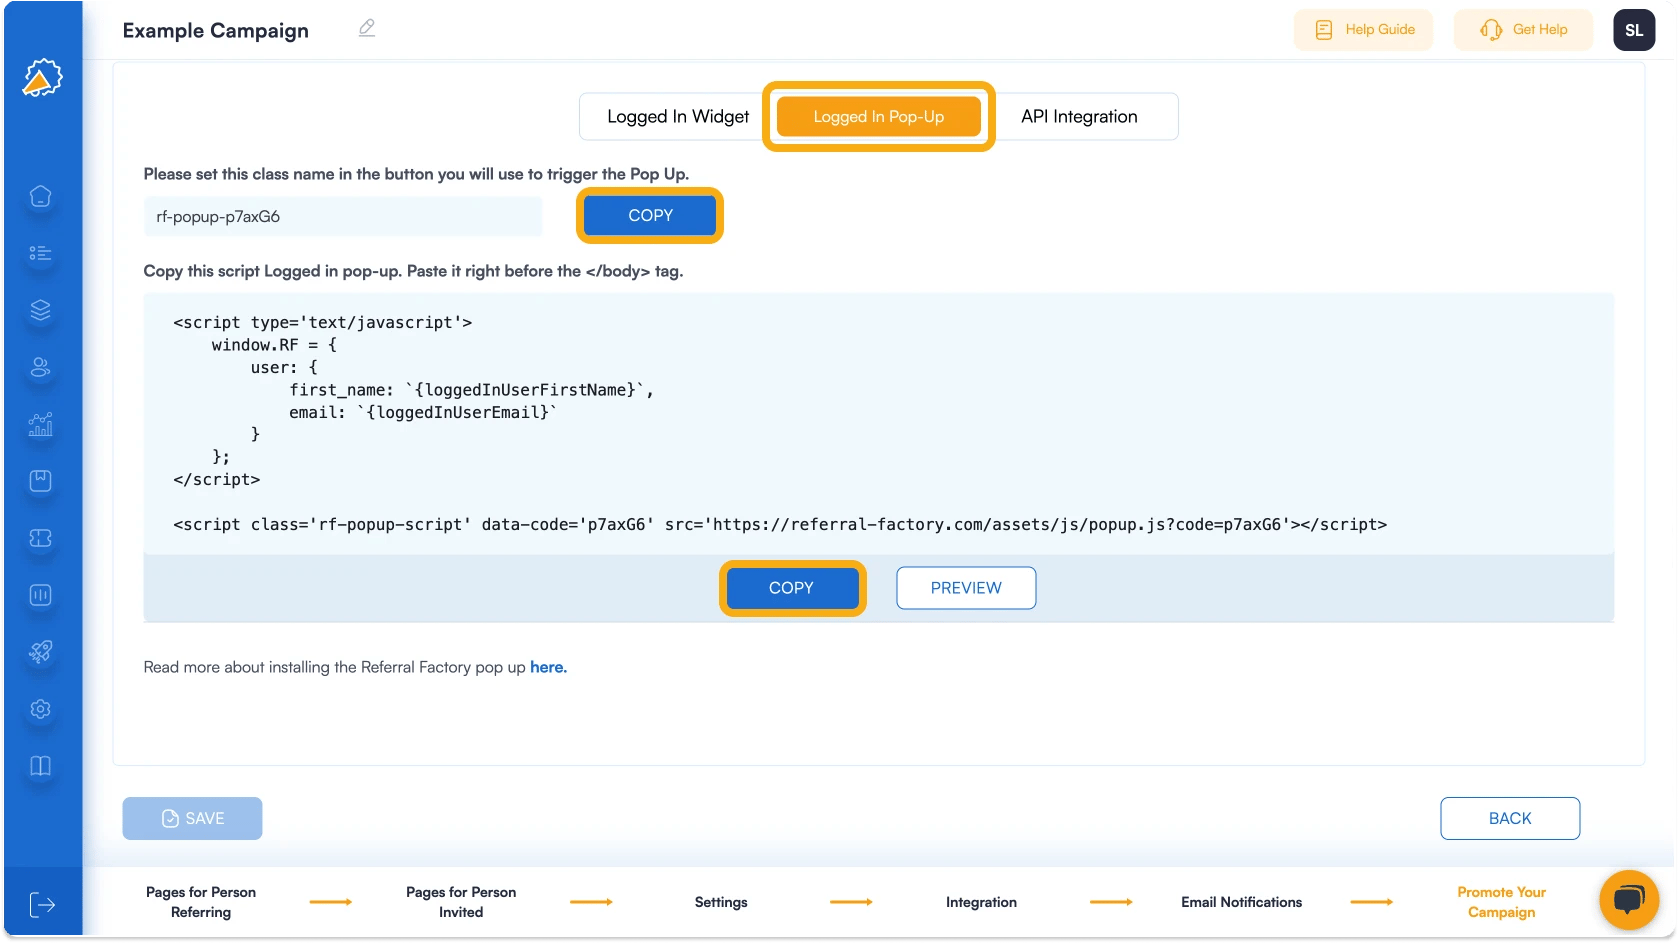 Screenshot showing how to get  the script for the logged in pop-up for your referral program.